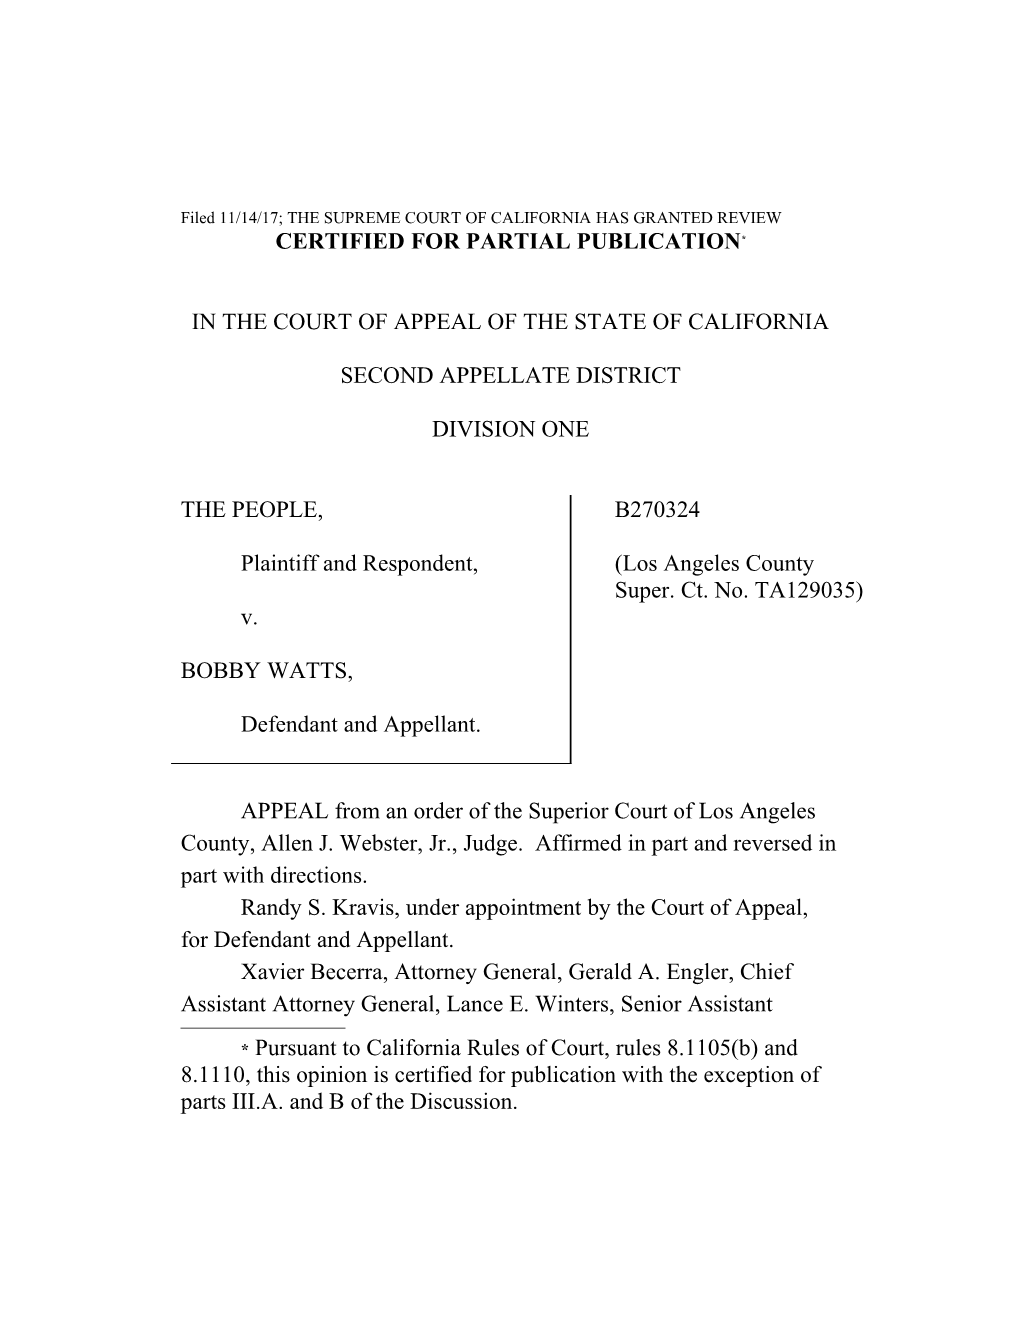 Filed 11/14/17; the SUPREME COURT of CALIFORNIA HAS GRANTED REVIEW